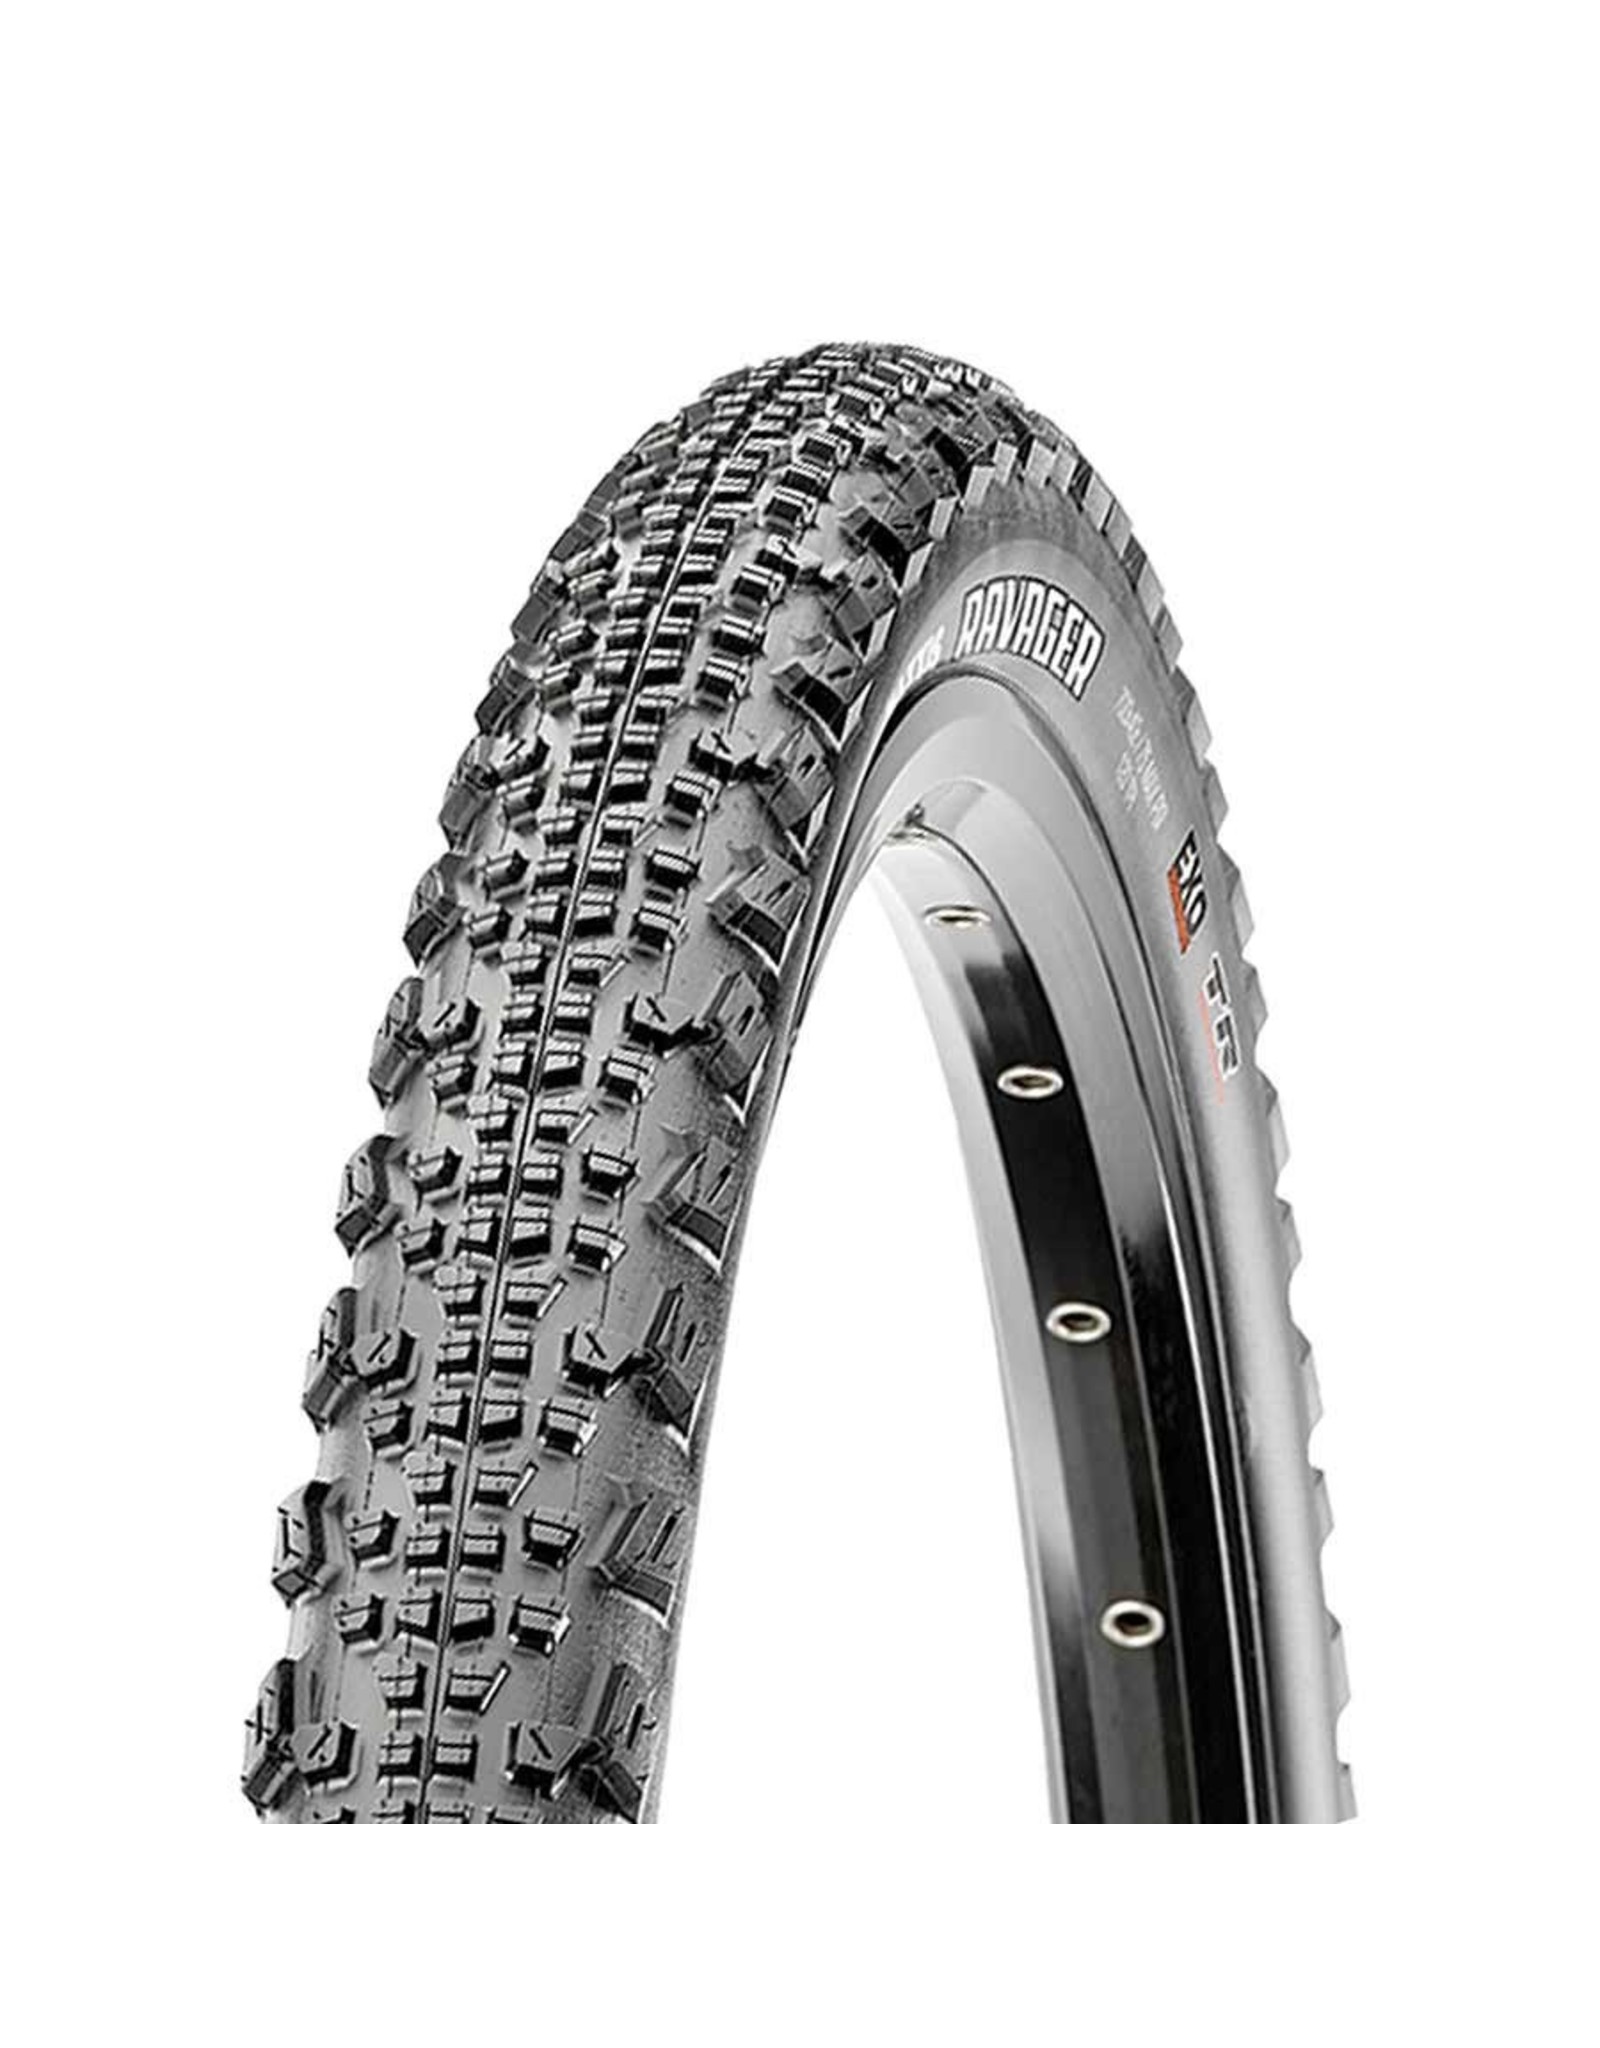 Maxxis Maxxis Ravager Folding, Tubeless Ready, Dual, EXO, 120TPI